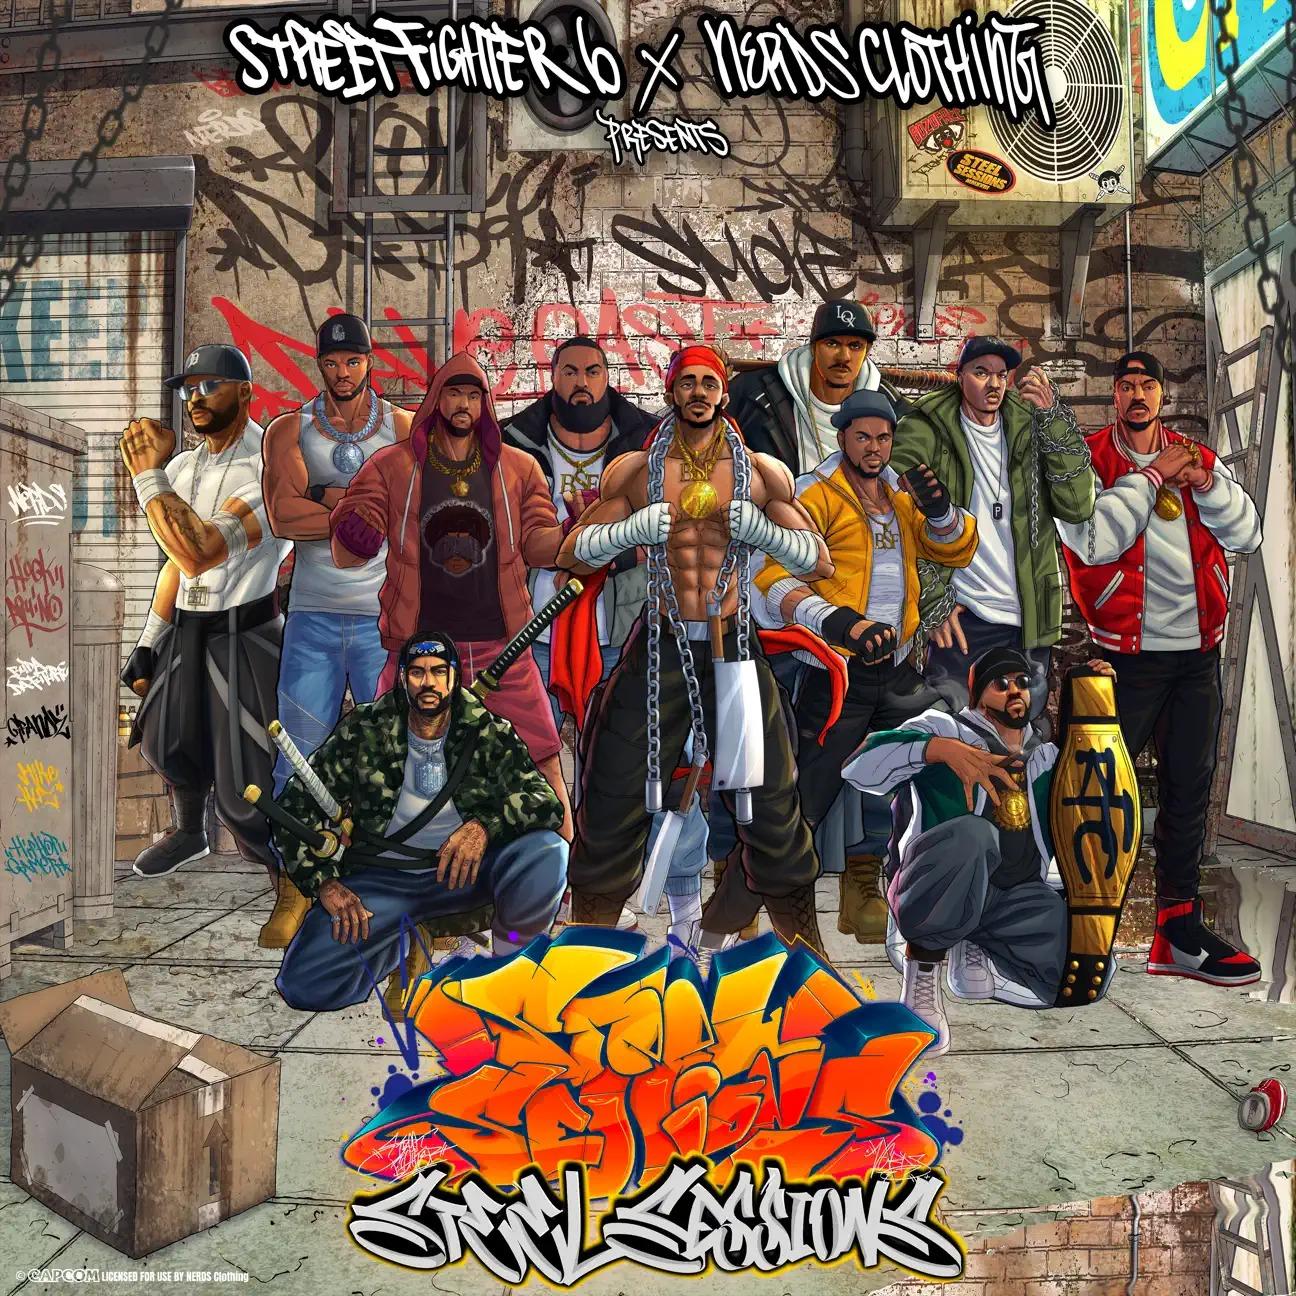 Street Fighter 6 x NERDS Clothing Presents: Steel Sessions